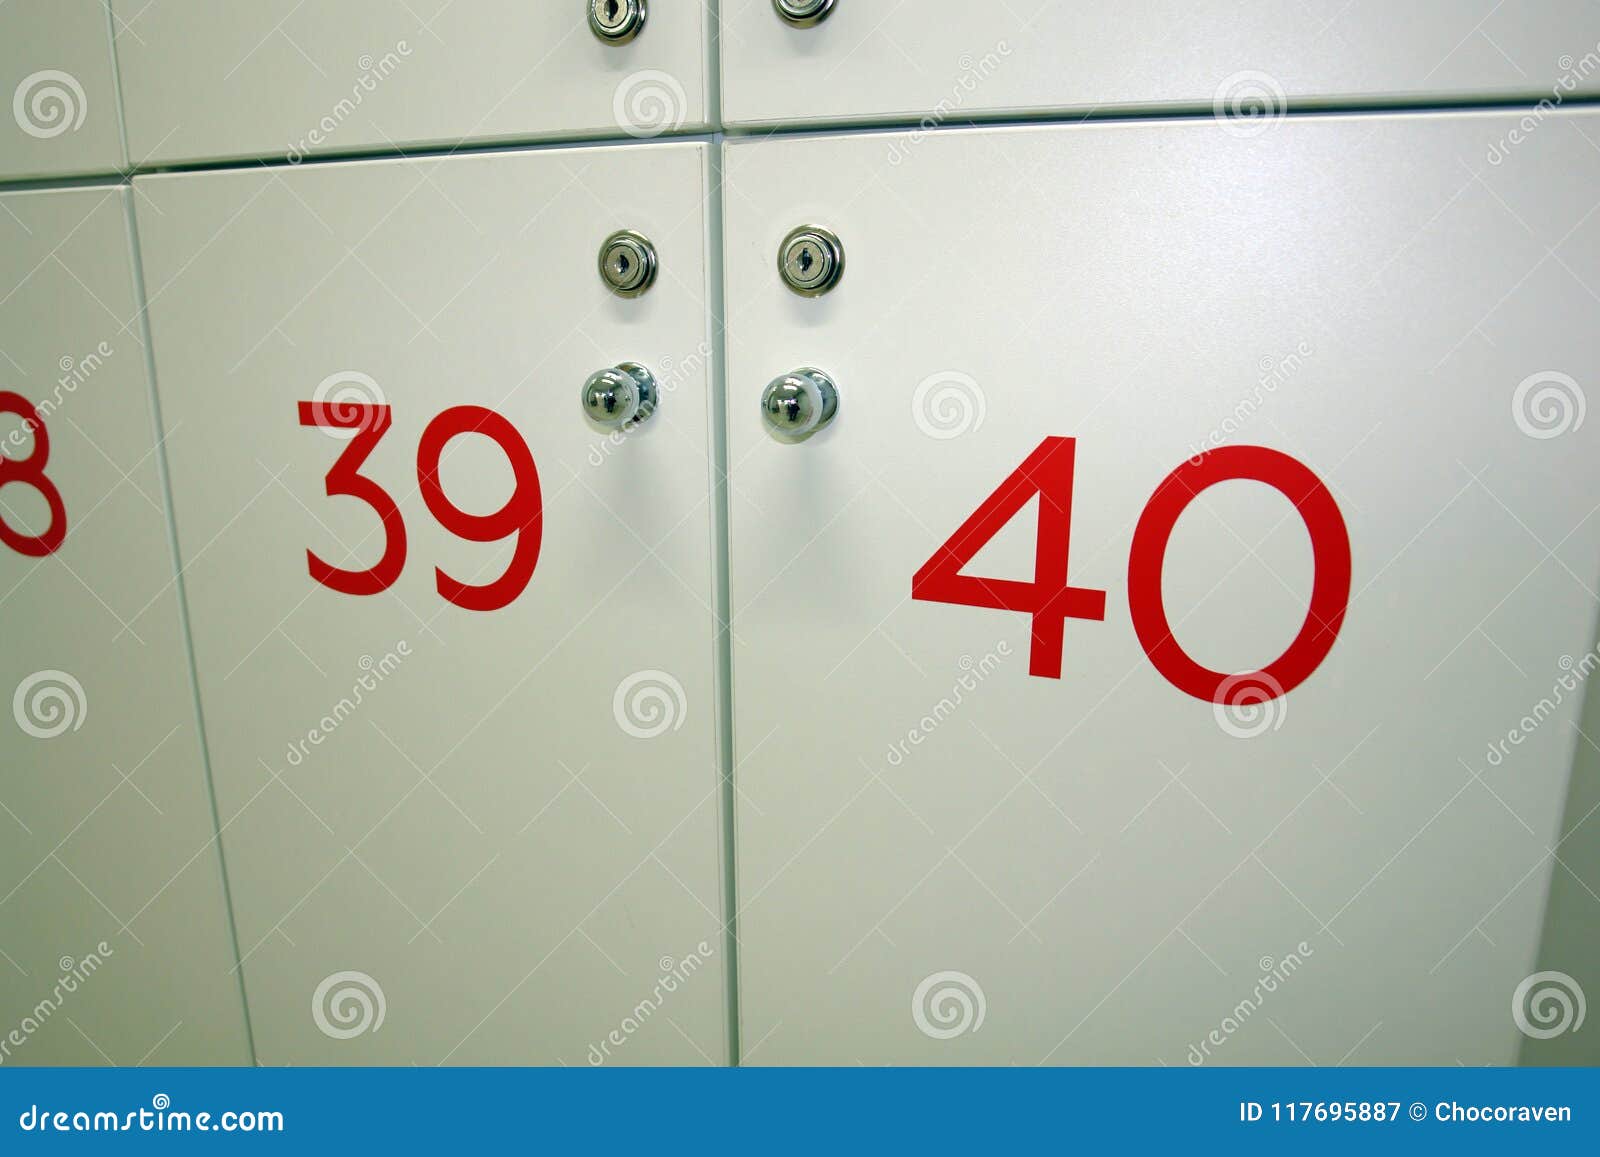 Lockers In The Locker Room Pool And Sports Club Stock Image